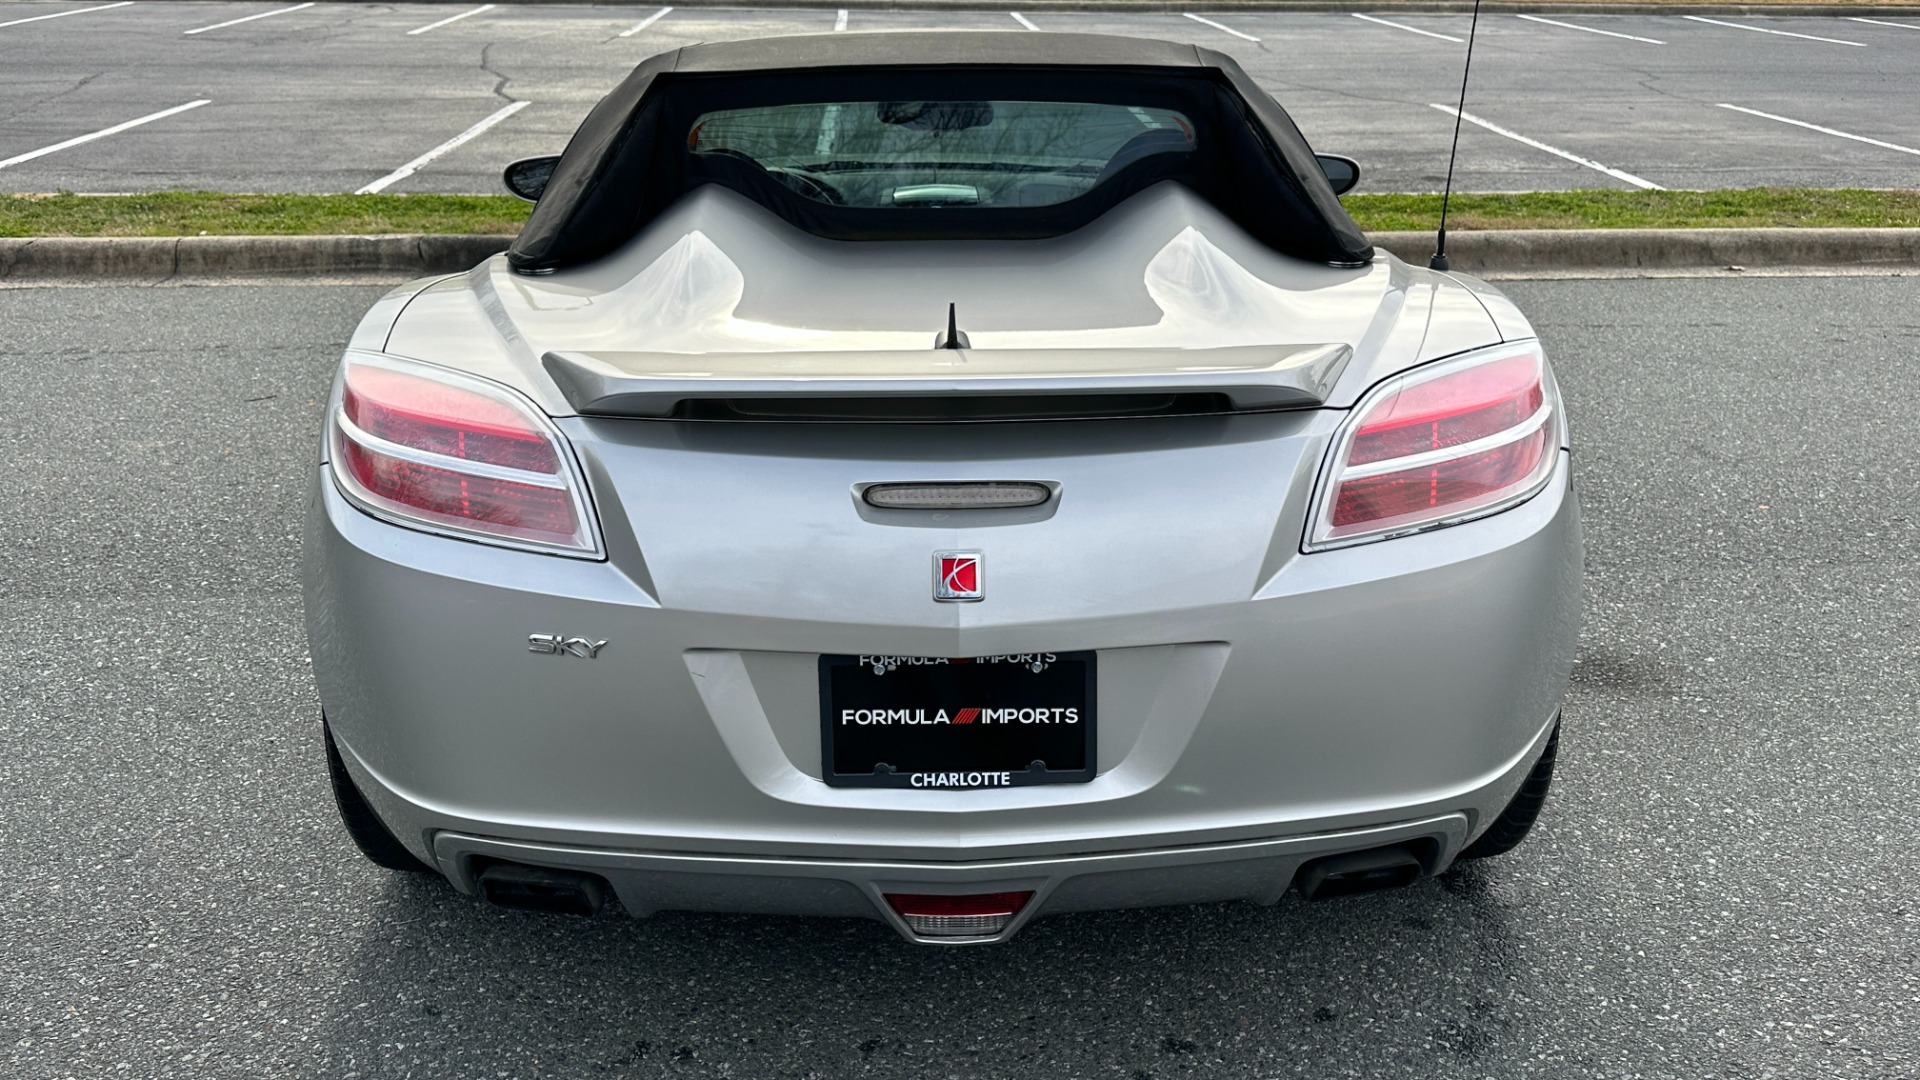 Used 2008 Saturn Sky CONVERTIBLE / MONSOON AUDIO / AUTOMATIC / PREMIUM TRIM / SPOILER for sale Sold at Formula Imports in Charlotte NC 28227 13